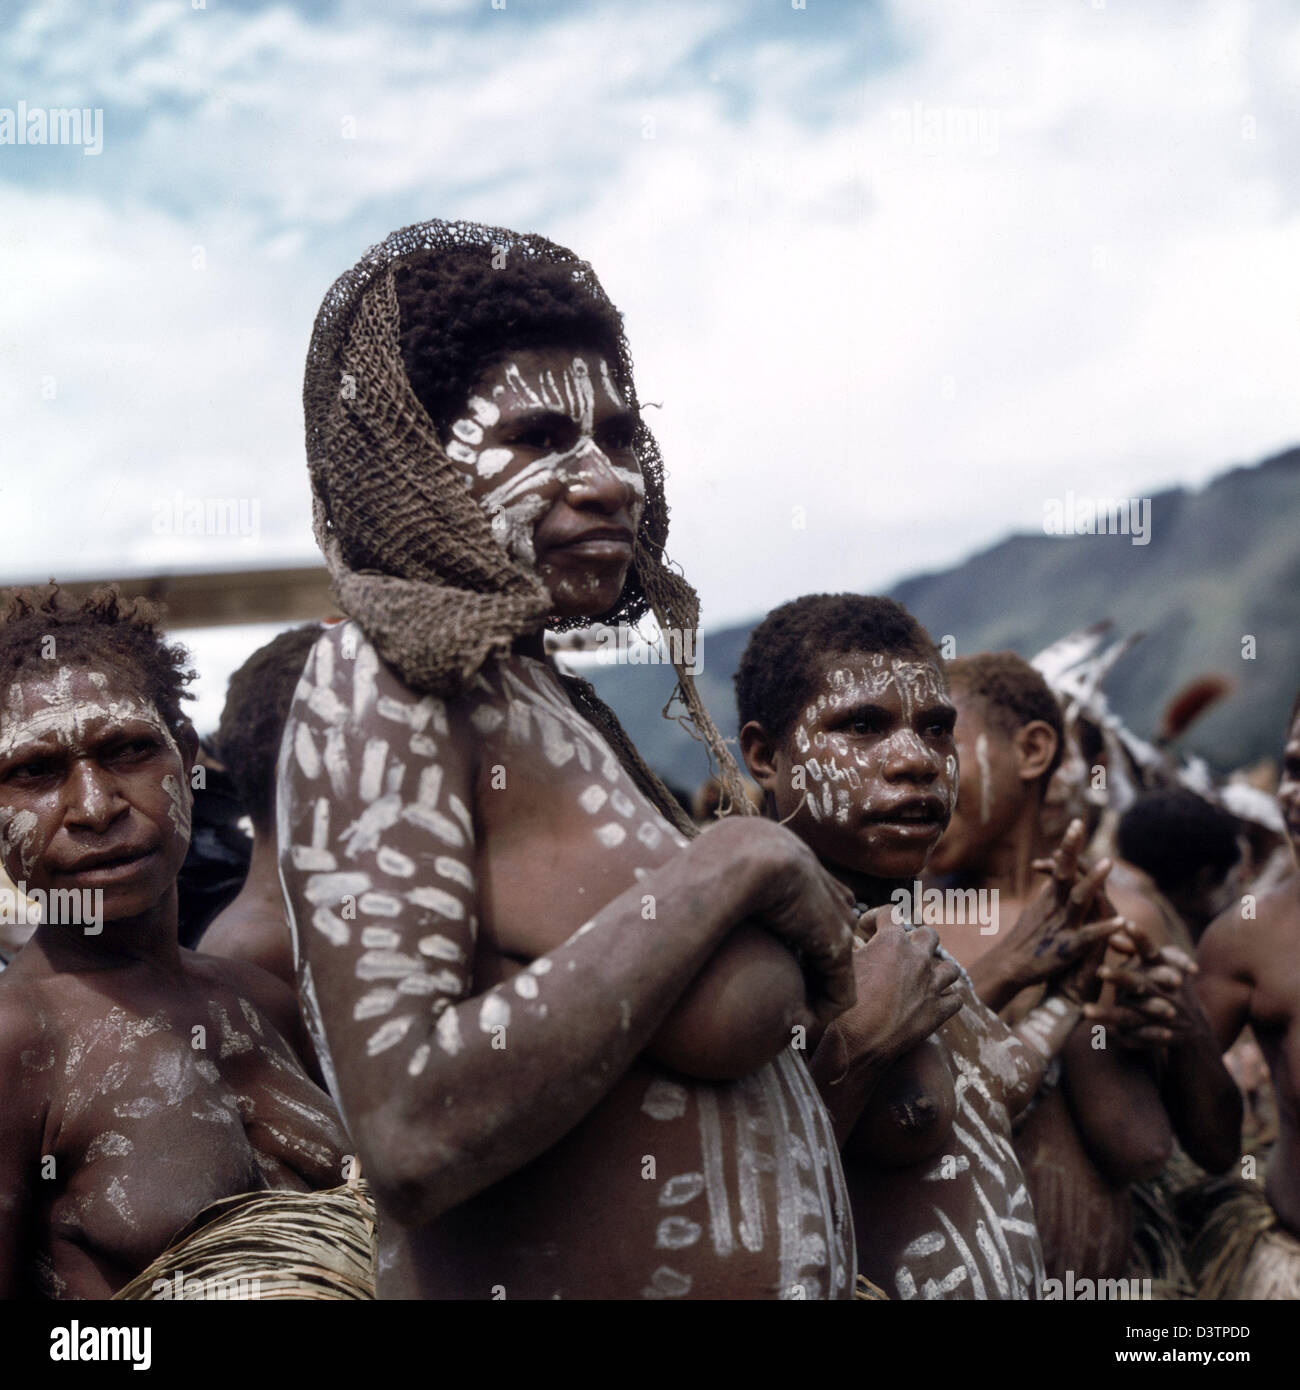 The undated picture shows a group of young Papua women with white body paint  in Papua New Guinea. The population of Papua New Guinea, consisting mainly  of Papuas, is very diverse. The